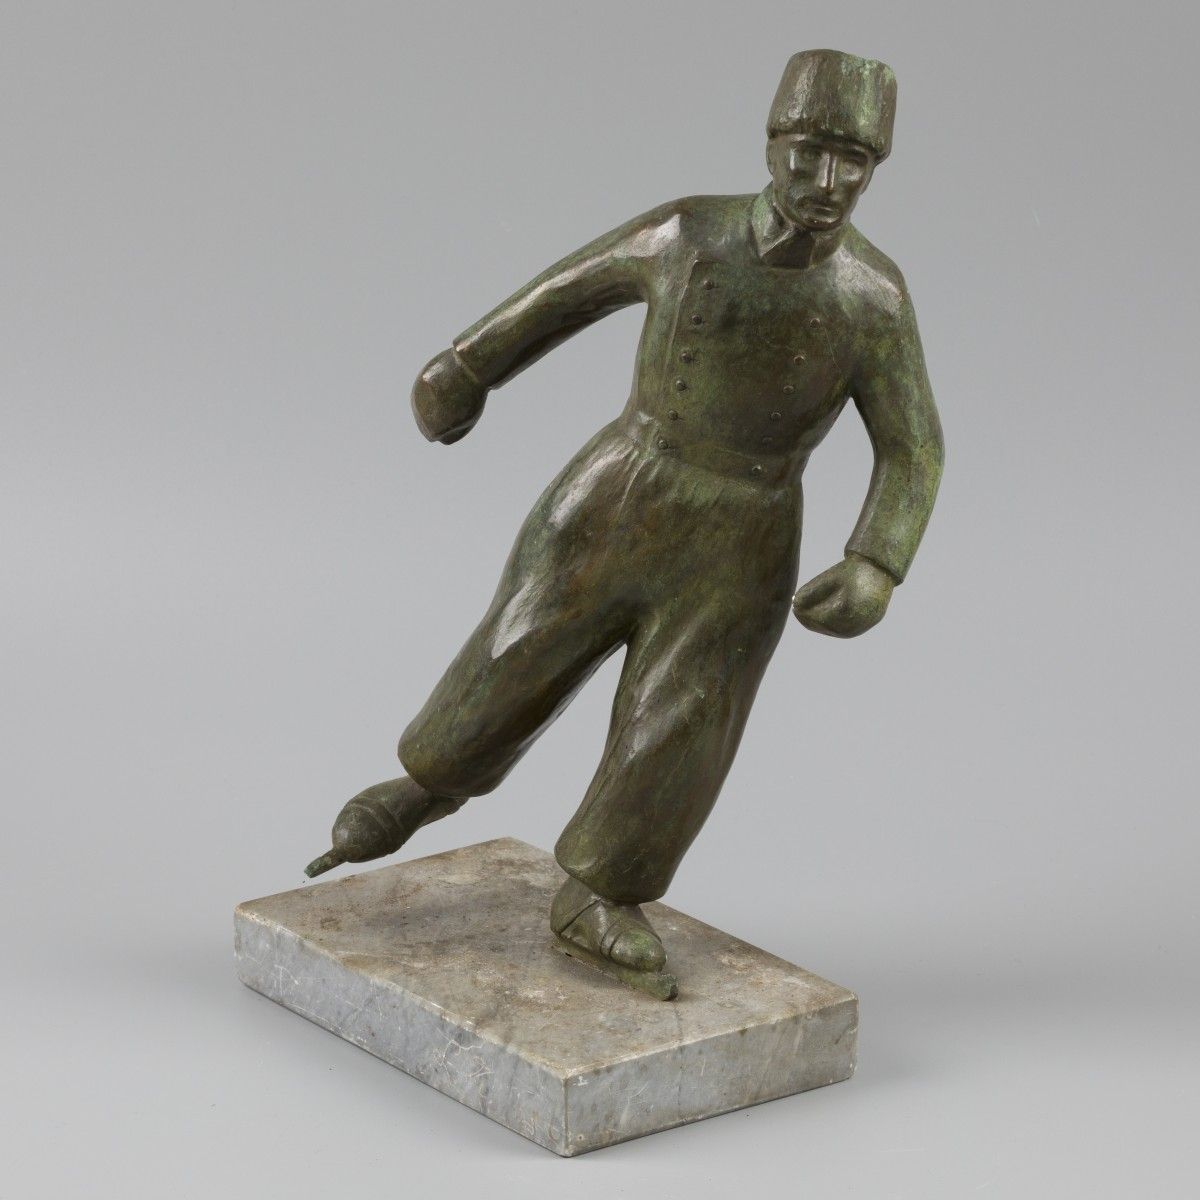 A bronze statuette of a fisherman from Volendam on skates. 35 x 21 x 12厘米。